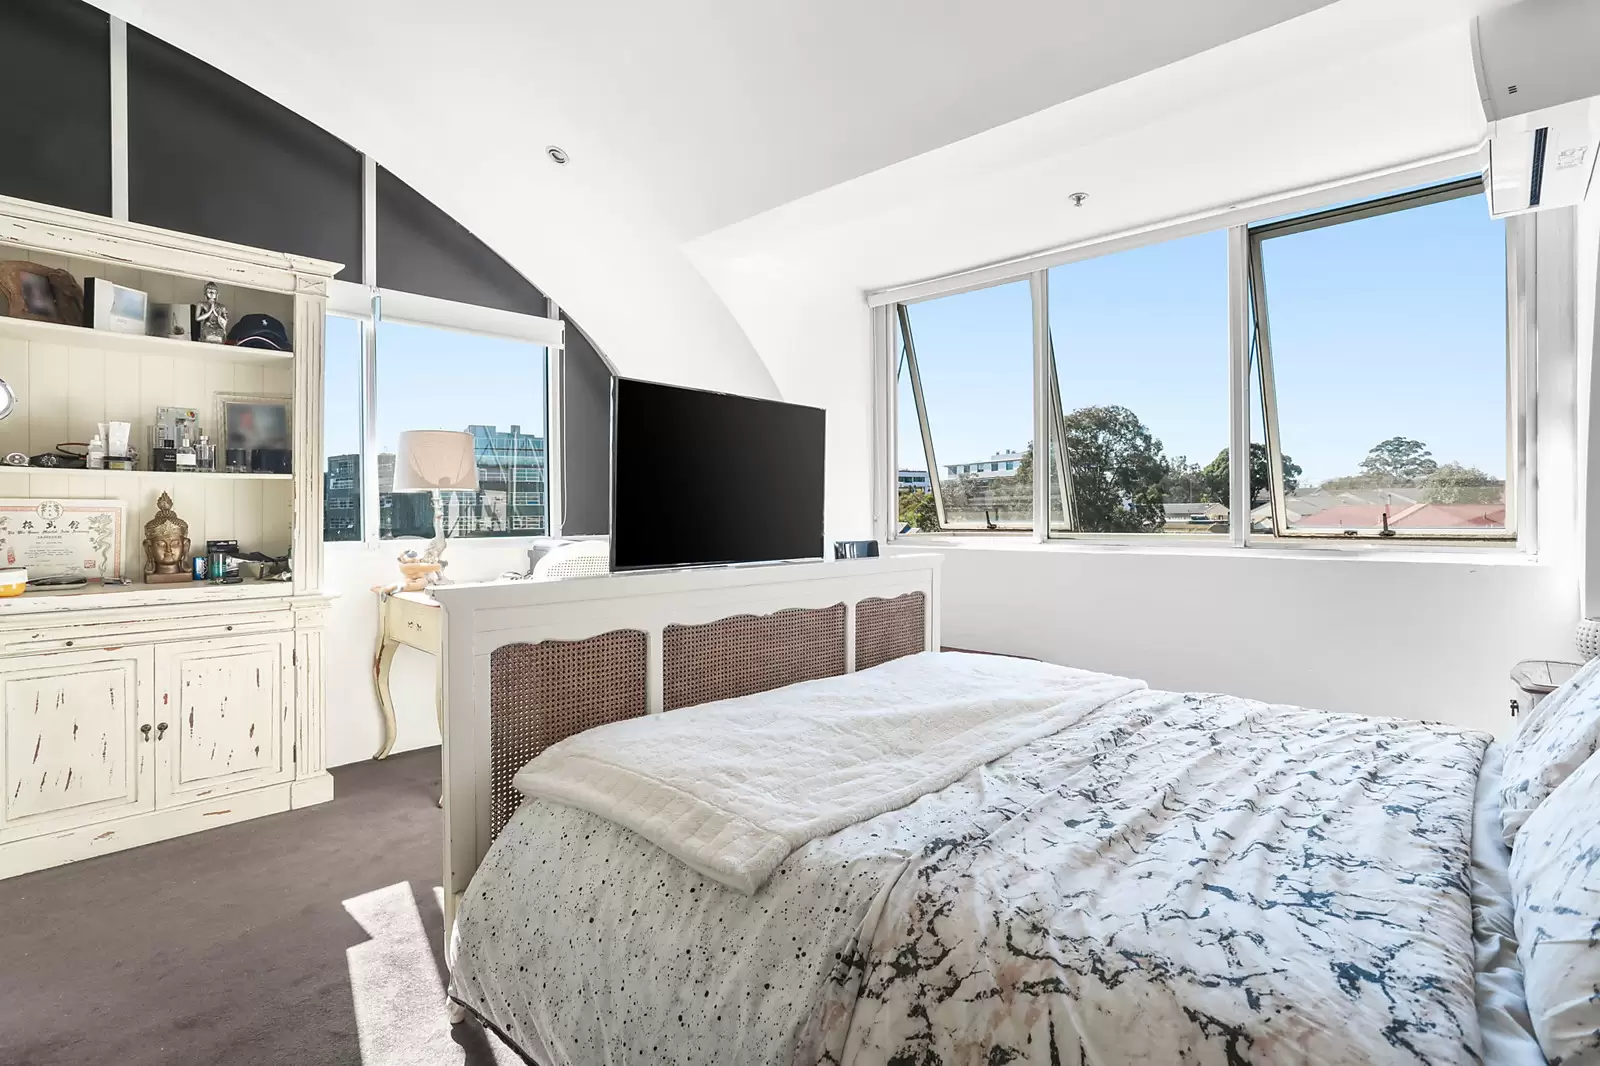 Photo #6: 27/8-14 Brumby Street, Surry Hills - Sold by Sydney Sotheby's International Realty